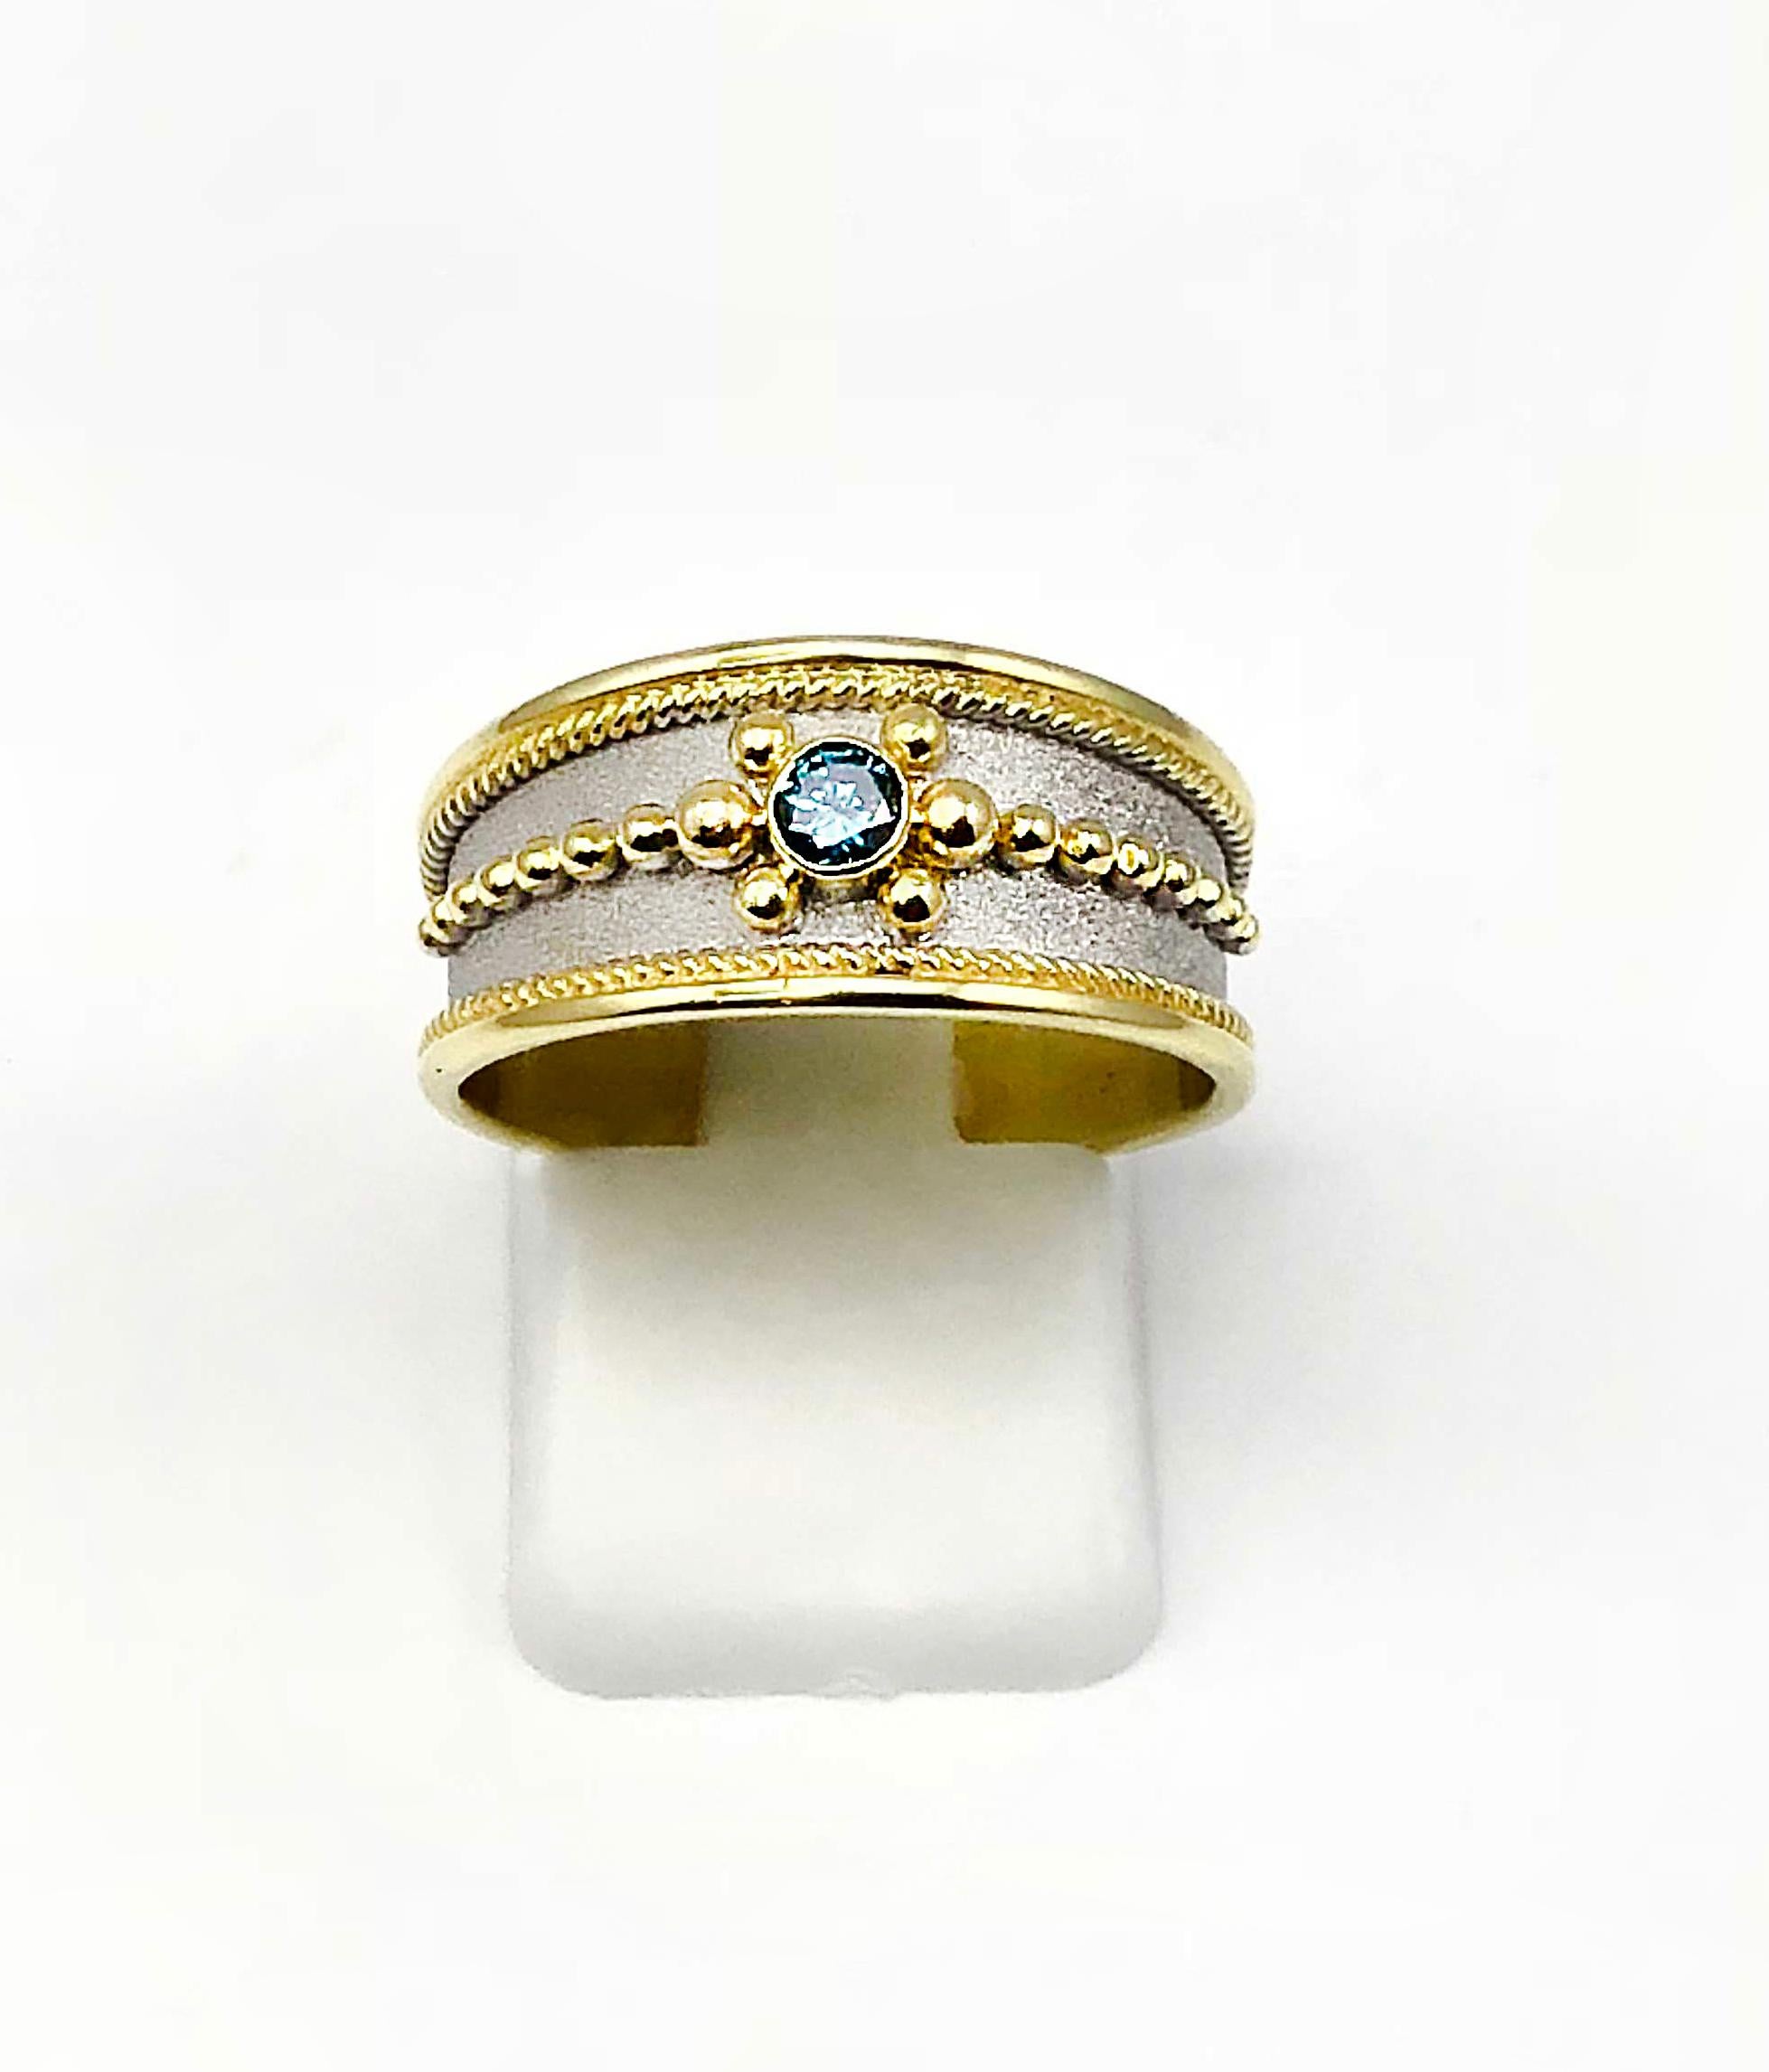 S.Georgios designer Band Ring in Yellow Gold 18 Karat all decorated with Byzantine-style granulation and a unique velvet background finished in White Rhodium. The center of the ring features a Blue Diamond total weight of 0.12 Carat.
This gorgeous